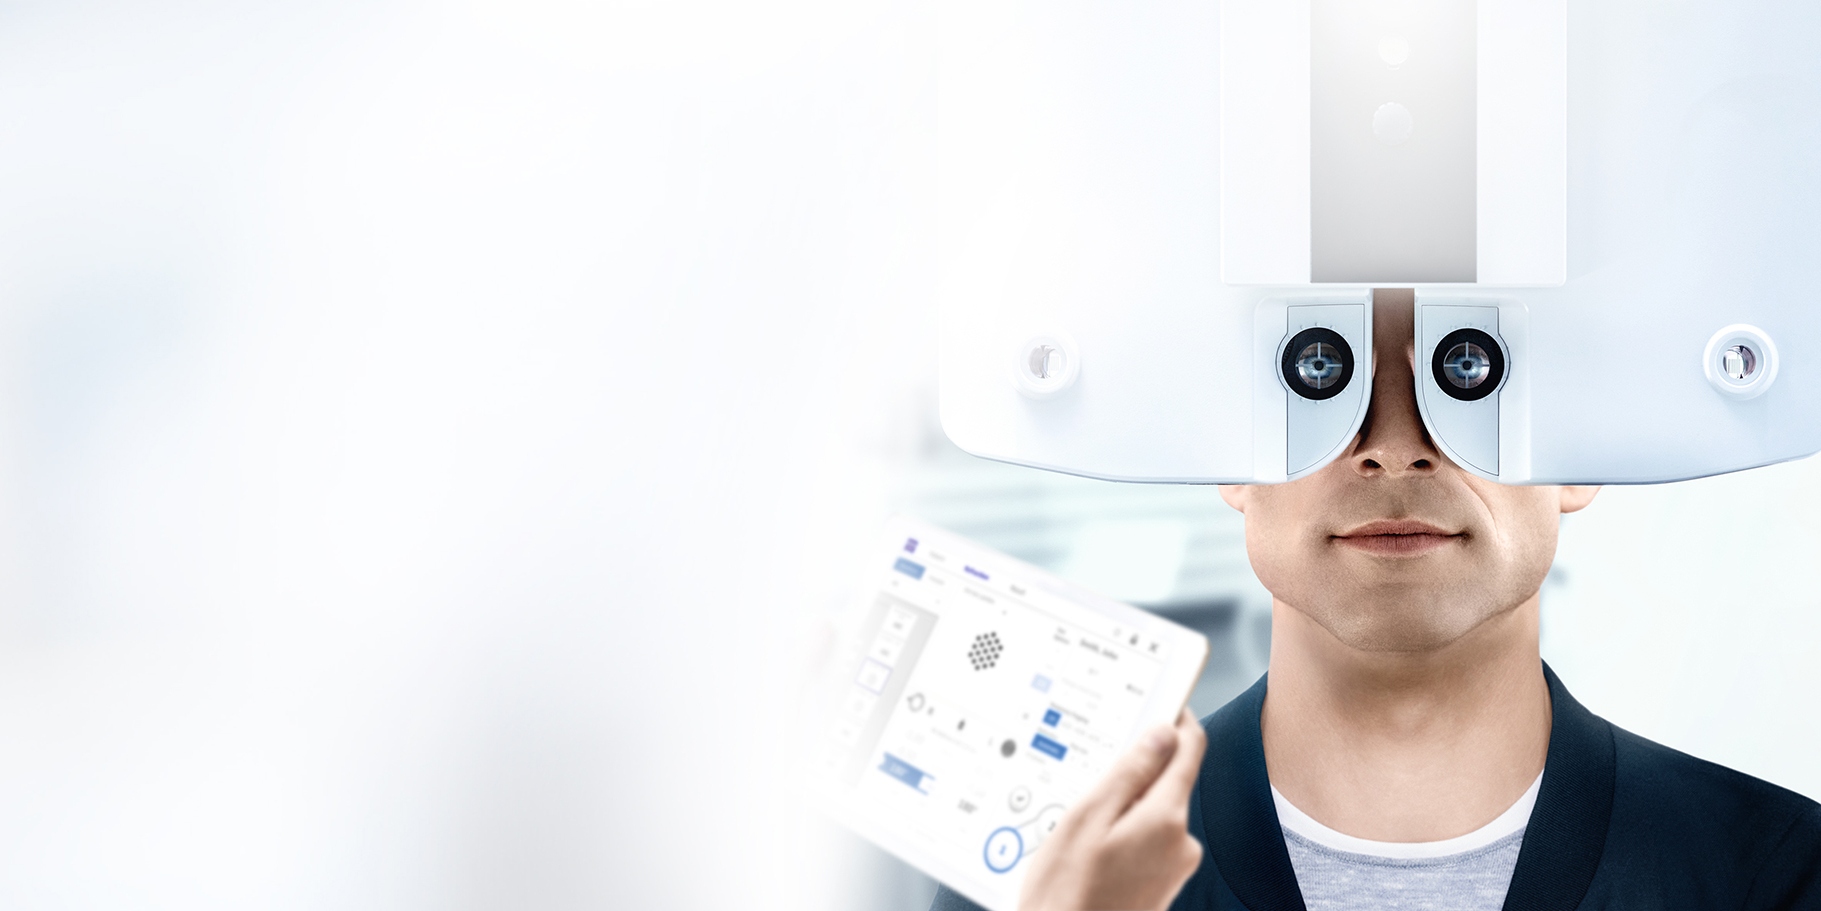 ZEISS Subjective Refraction Unit saves time in the refraction process and reduces the risk of significant deviations.